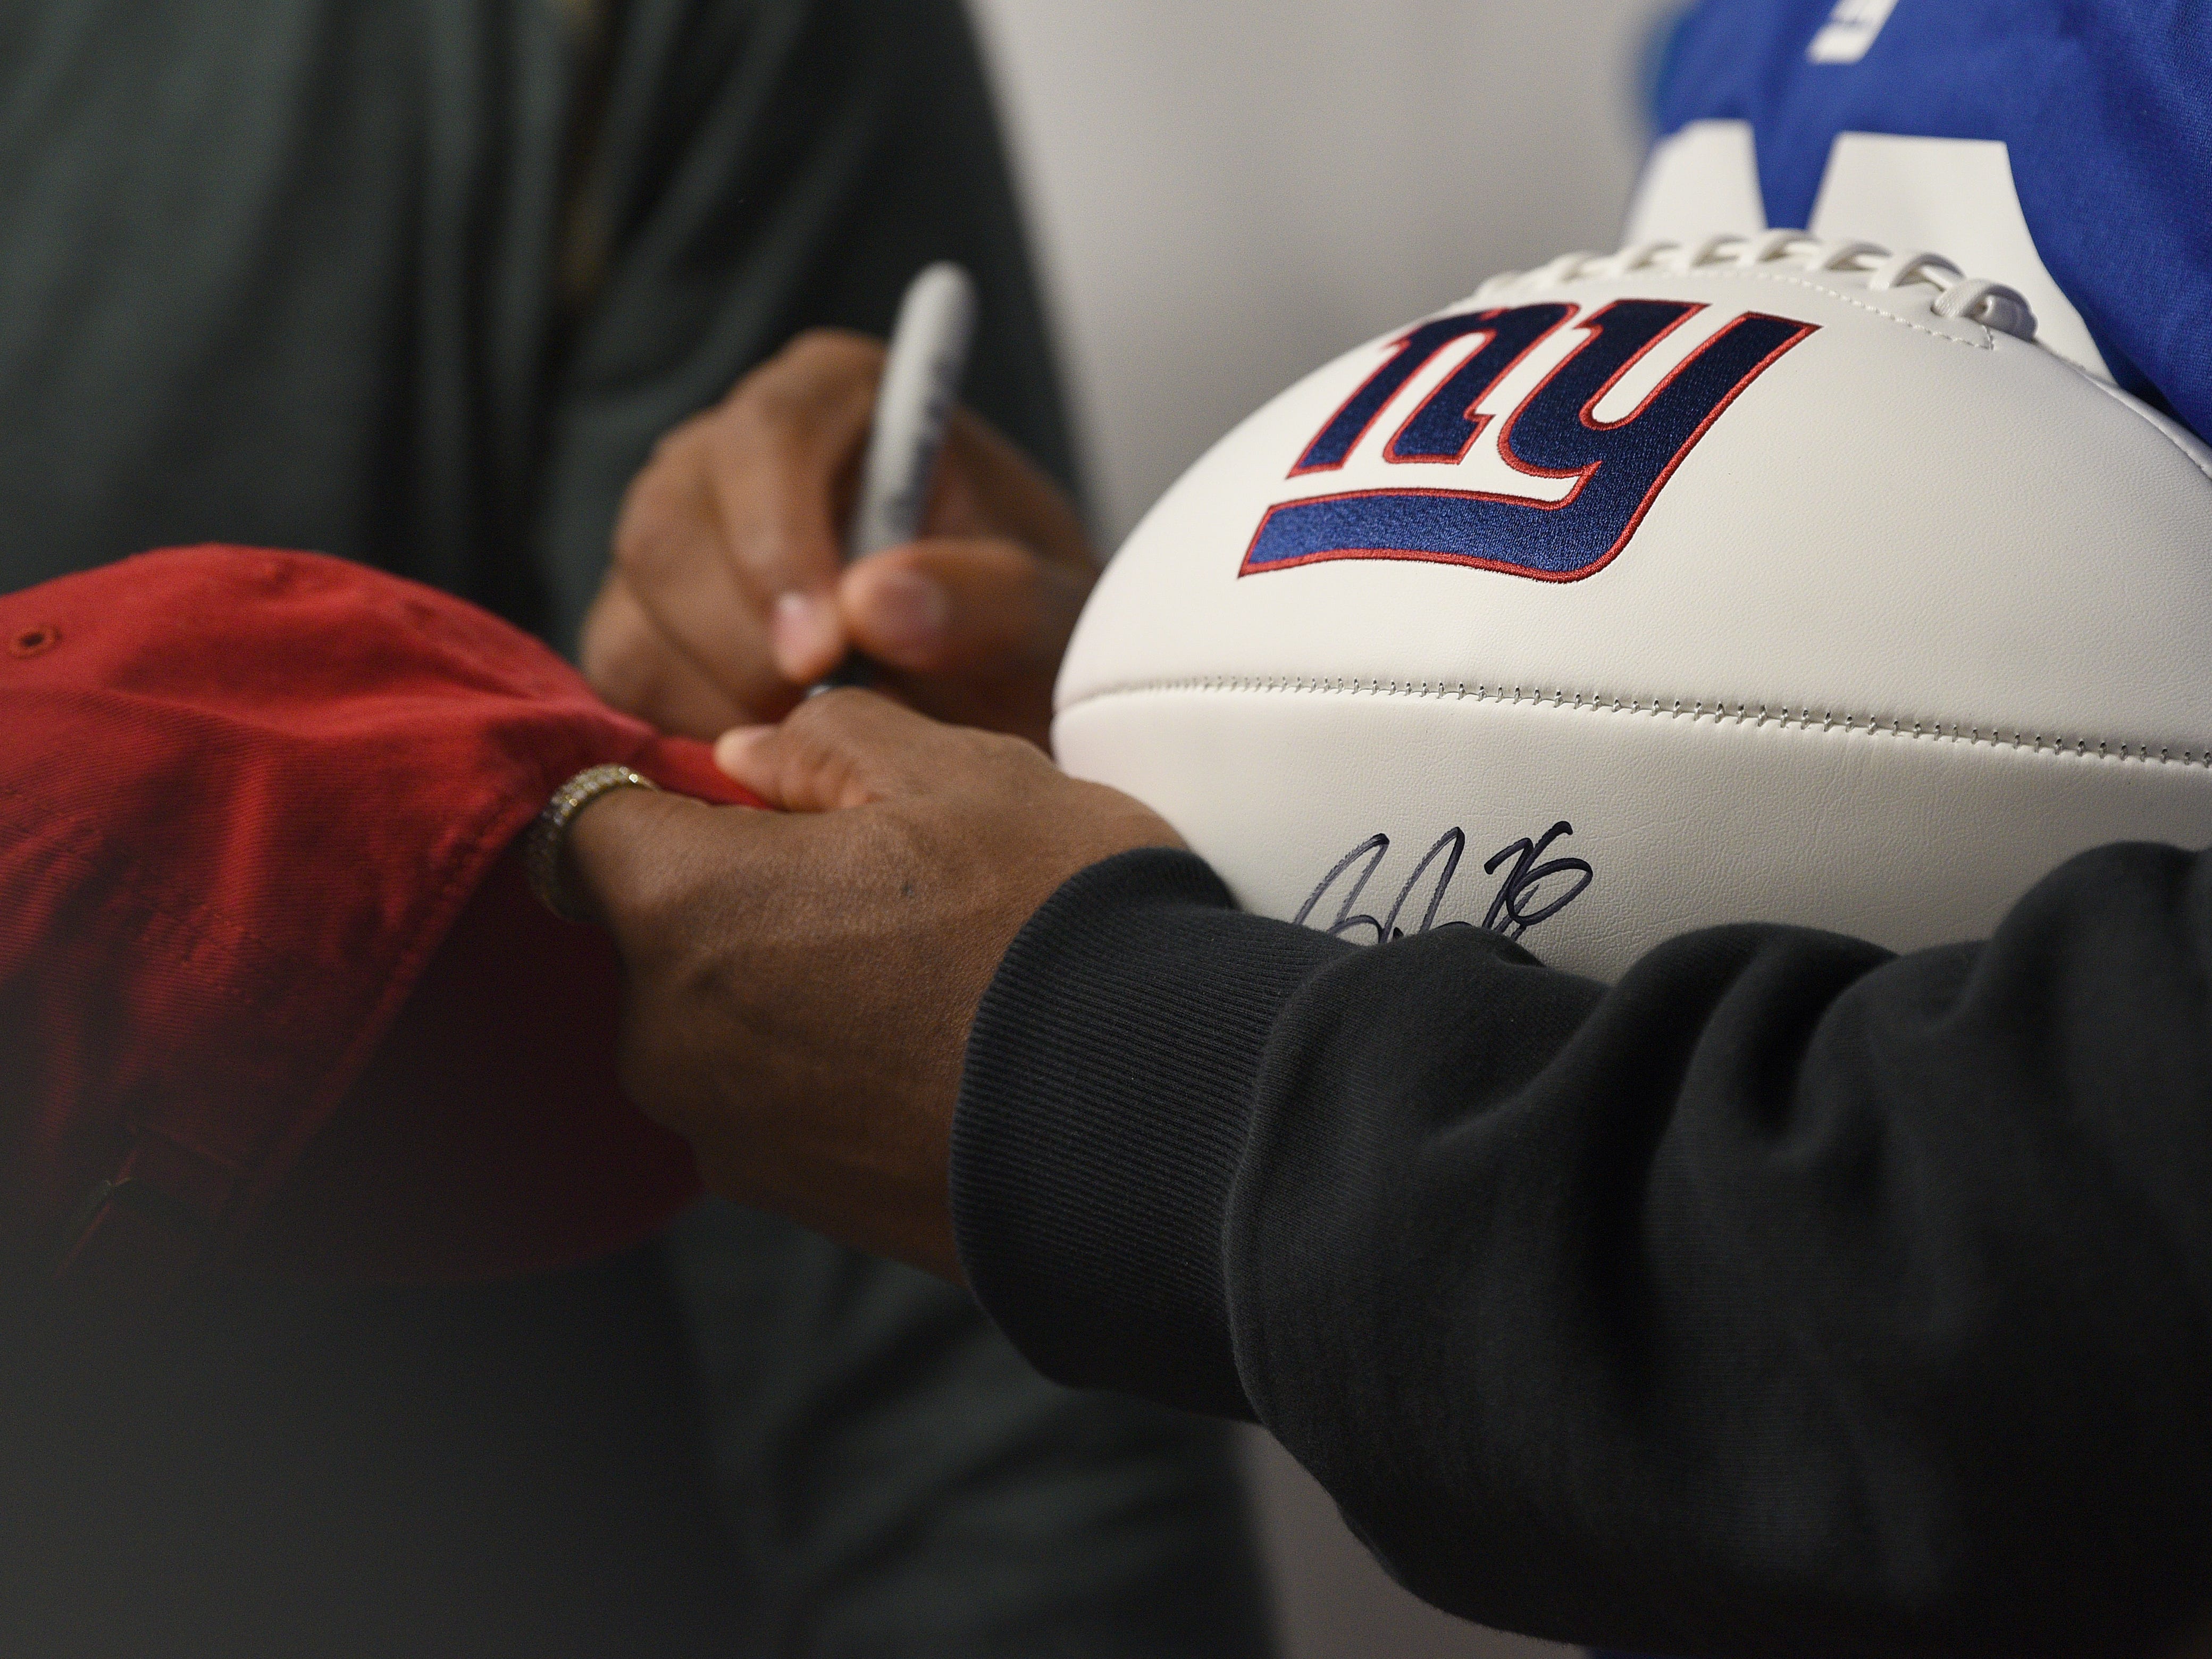 Covenant House holds a Sleep Out Executive Edition in Newark on Thursday November 21, 2019. Saquon Barkley a player with the Giants and Sleep Out: Executive Edition Chairman, signs a hat. 